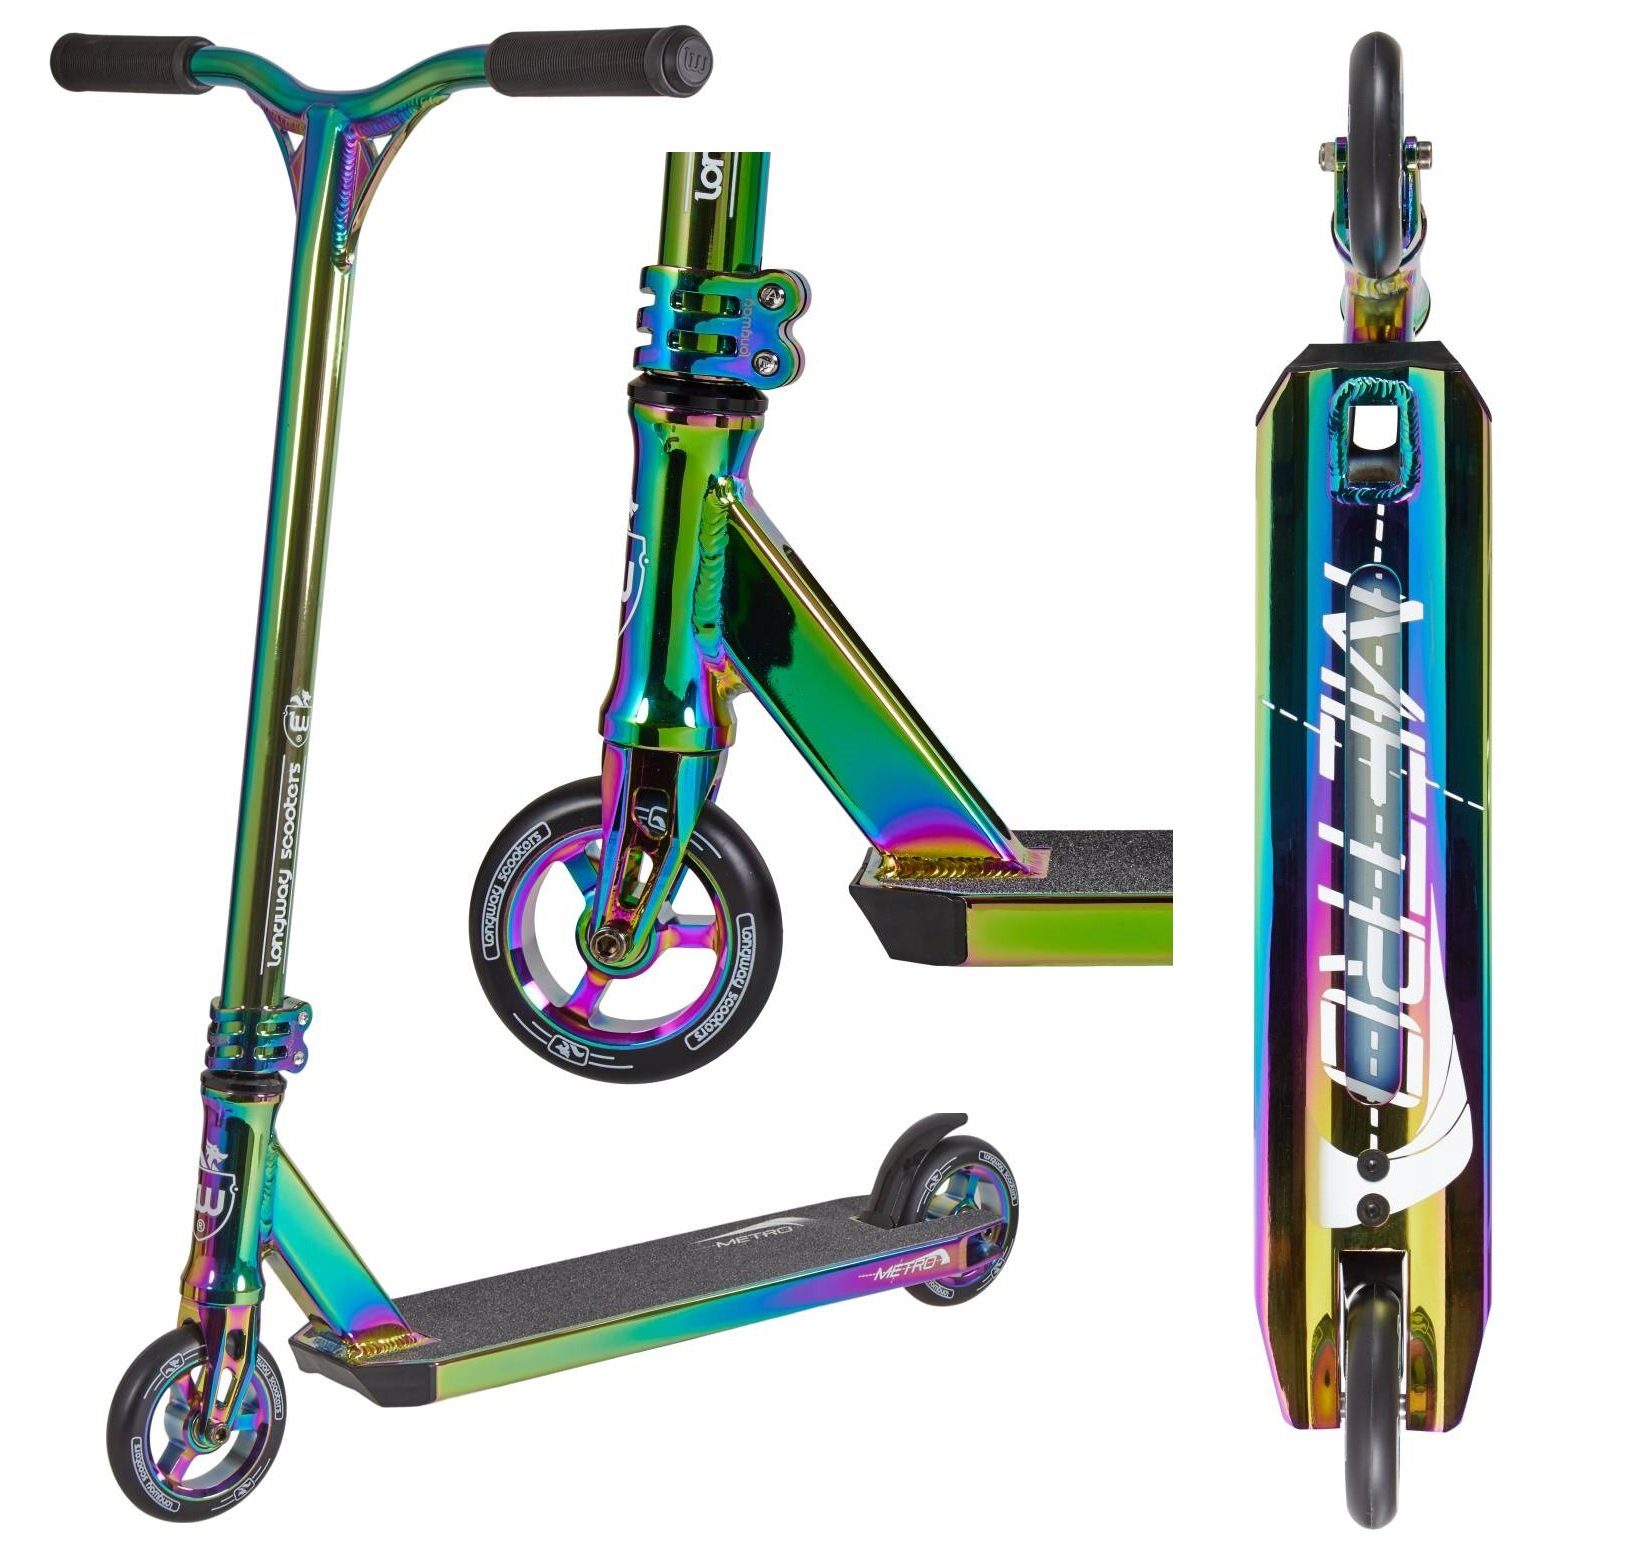 F26 Longway Scooters Metro Stunt-Scooter Longway 2K19 Stuntscooter + Neochrome H=79cm Full Griptape